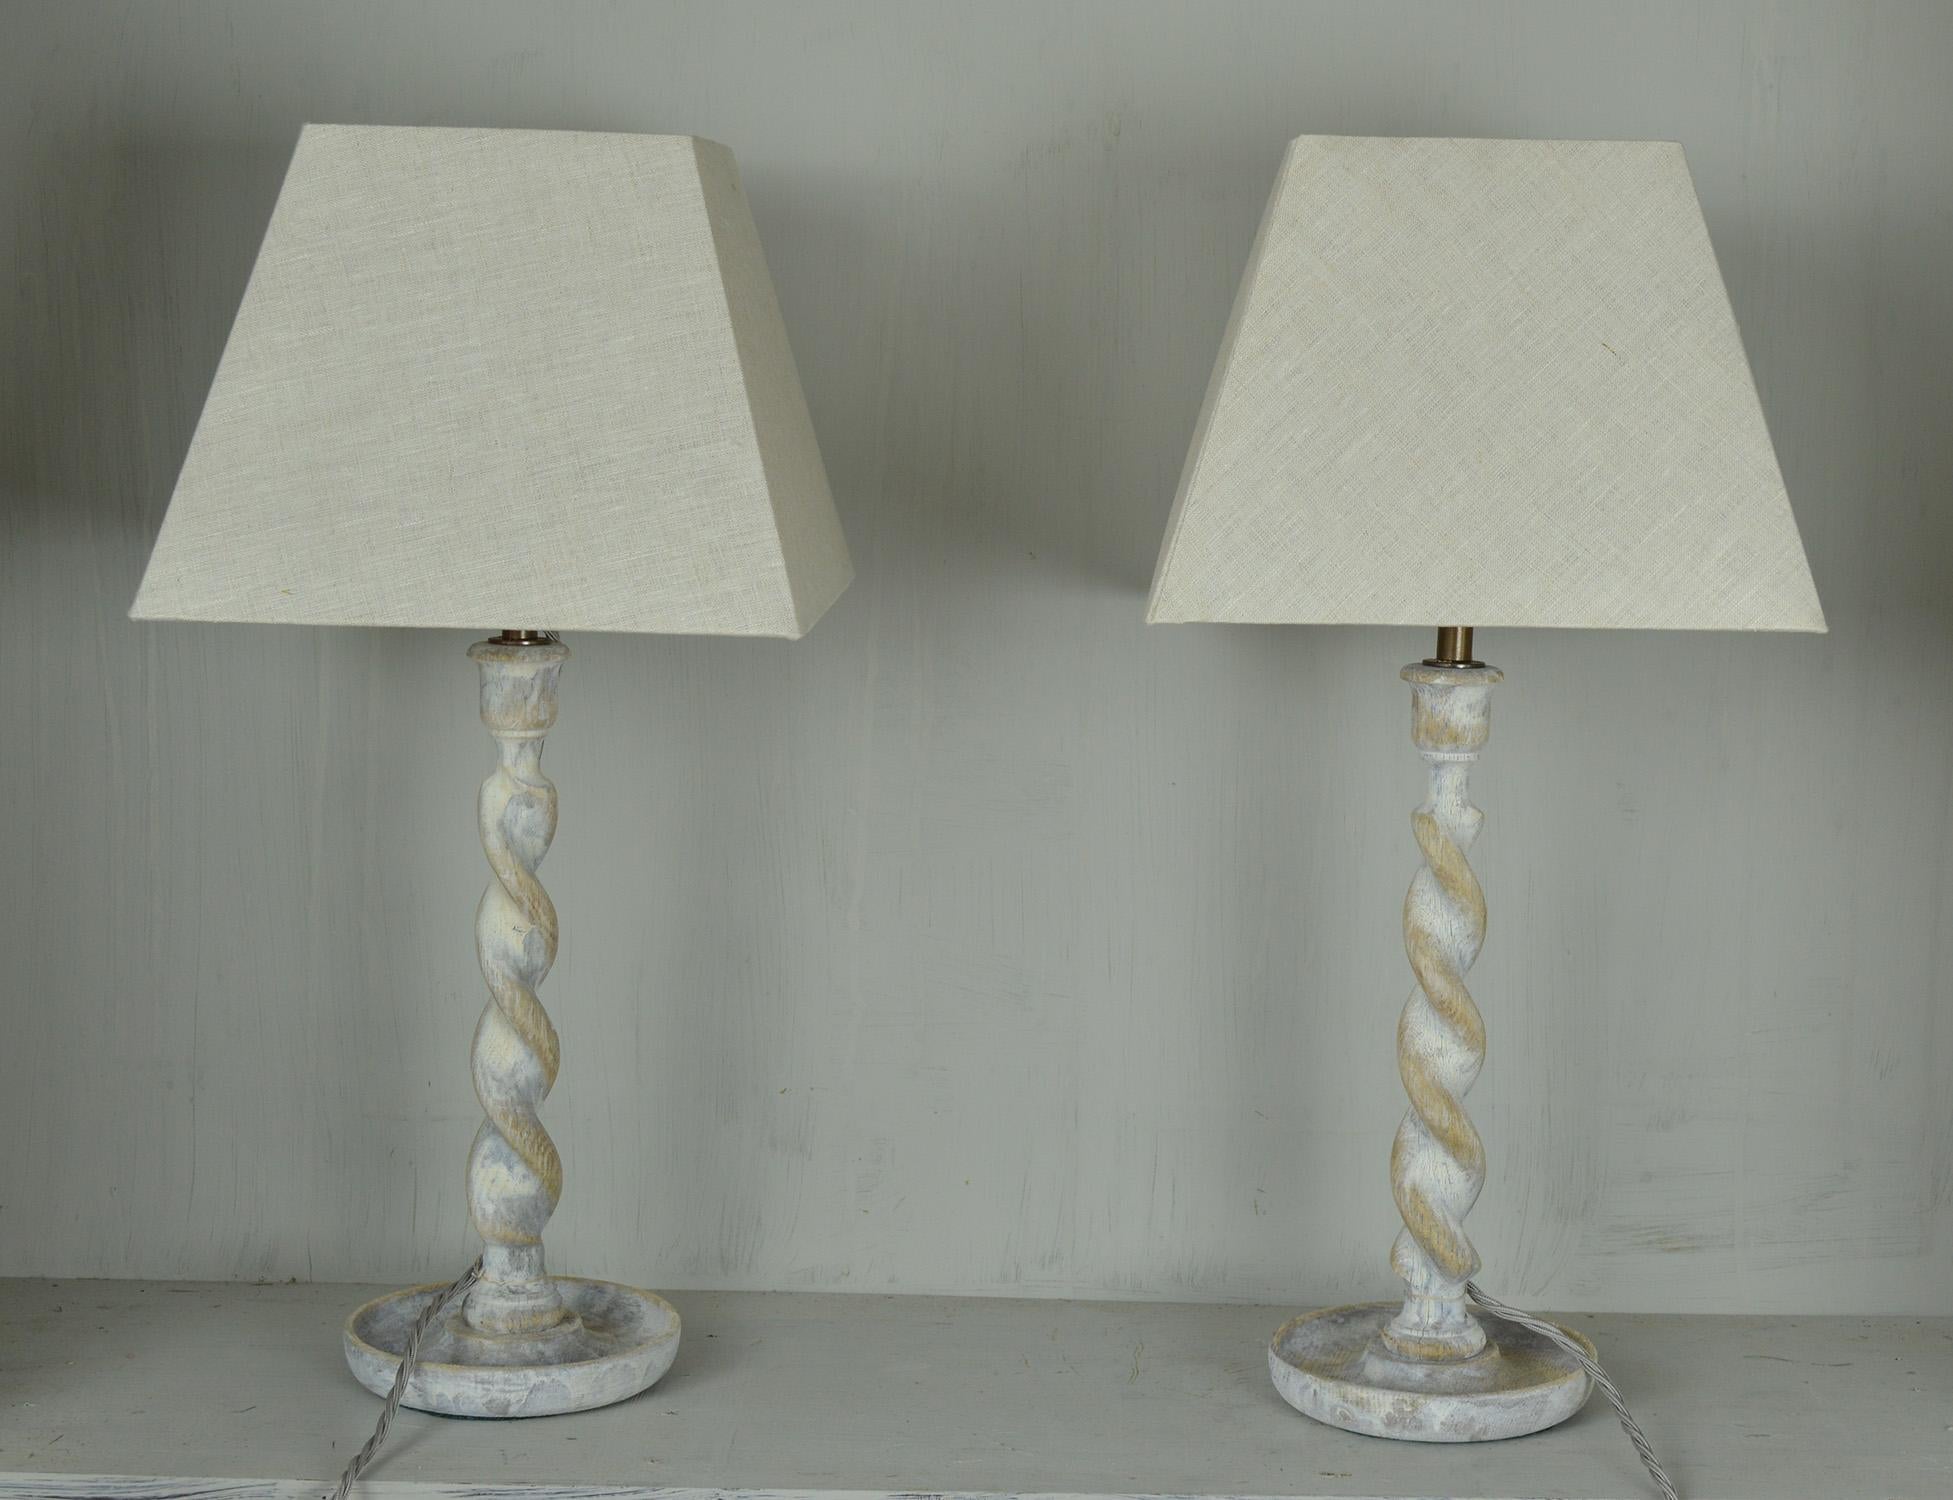 Super pair of limed oak barley twist table lamps.

Converted from candlesticks.

The oak has been recently limed to enhance the beauty in the grain of the oak.

The shades are linen.

Professionally wired to UK standards.
 